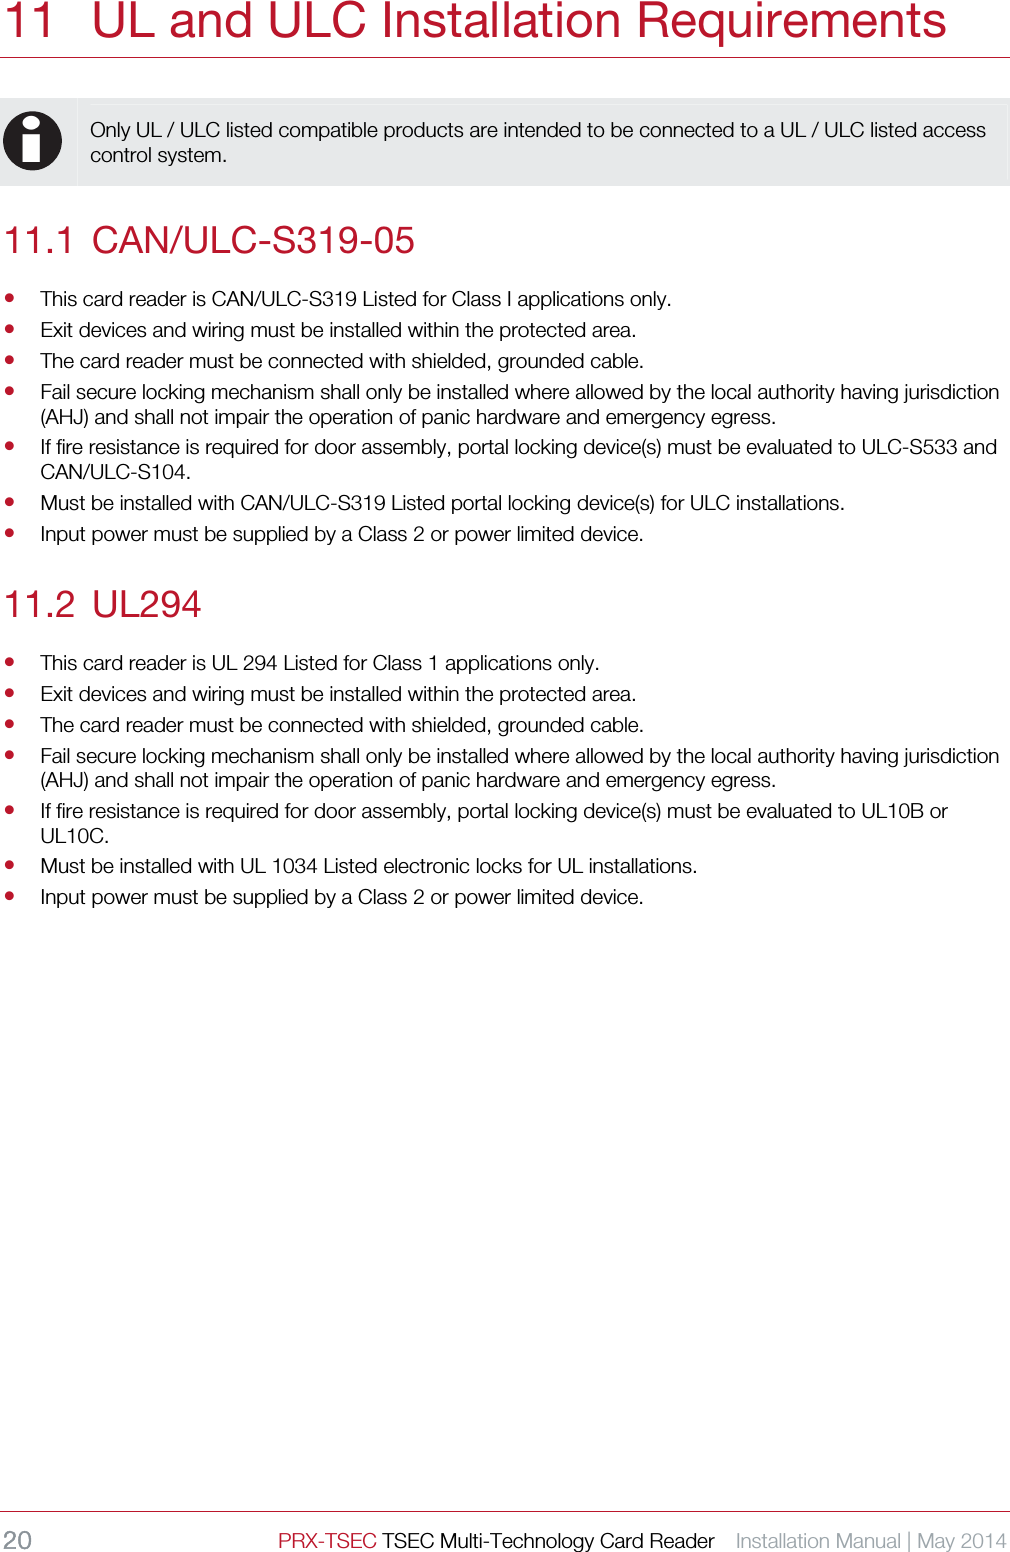 20 PRX-TSEC TSEC Multi-Technology Card Reader    Installation Manual | May 2014    11 UL and ULC Installation Requirements  i Only UL / ULC listed compatible products are intended to be connected to a UL / ULC listed access control system.  11.1 CAN/ULC-S319-05  This card reader is CAN/ULC-S319 Listed for Class I applications only.  Exit devices and wiring must be installed within the protected area.  The card reader must be connected with shielded, grounded cable.    Fail secure locking mechanism shall only be installed where allowed by the local authority having jurisdiction (AHJ) and shall not impair the operation of panic hardware and emergency egress.  If fire resistance is required for door assembly, portal locking device(s) must be evaluated to ULC-S533 and CAN/ULC-S104.  Must be installed with CAN/ULC-S319 Listed portal locking device(s) for ULC installations.  Input power must be supplied by a Class 2 or power limited device. 11.2 UL294  This card reader is UL 294 Listed for Class 1 applications only.  Exit devices and wiring must be installed within the protected area.  The card reader must be connected with shielded, grounded cable.    Fail secure locking mechanism shall only be installed where allowed by the local authority having jurisdiction (AHJ) and shall not impair the operation of panic hardware and emergency egress.  If fire resistance is required for door assembly, portal locking device(s) must be evaluated to UL10B or UL10C.  Must be installed with UL 1034 Listed electronic locks for UL installations.  Input power must be supplied by a Class 2 or power limited device.  